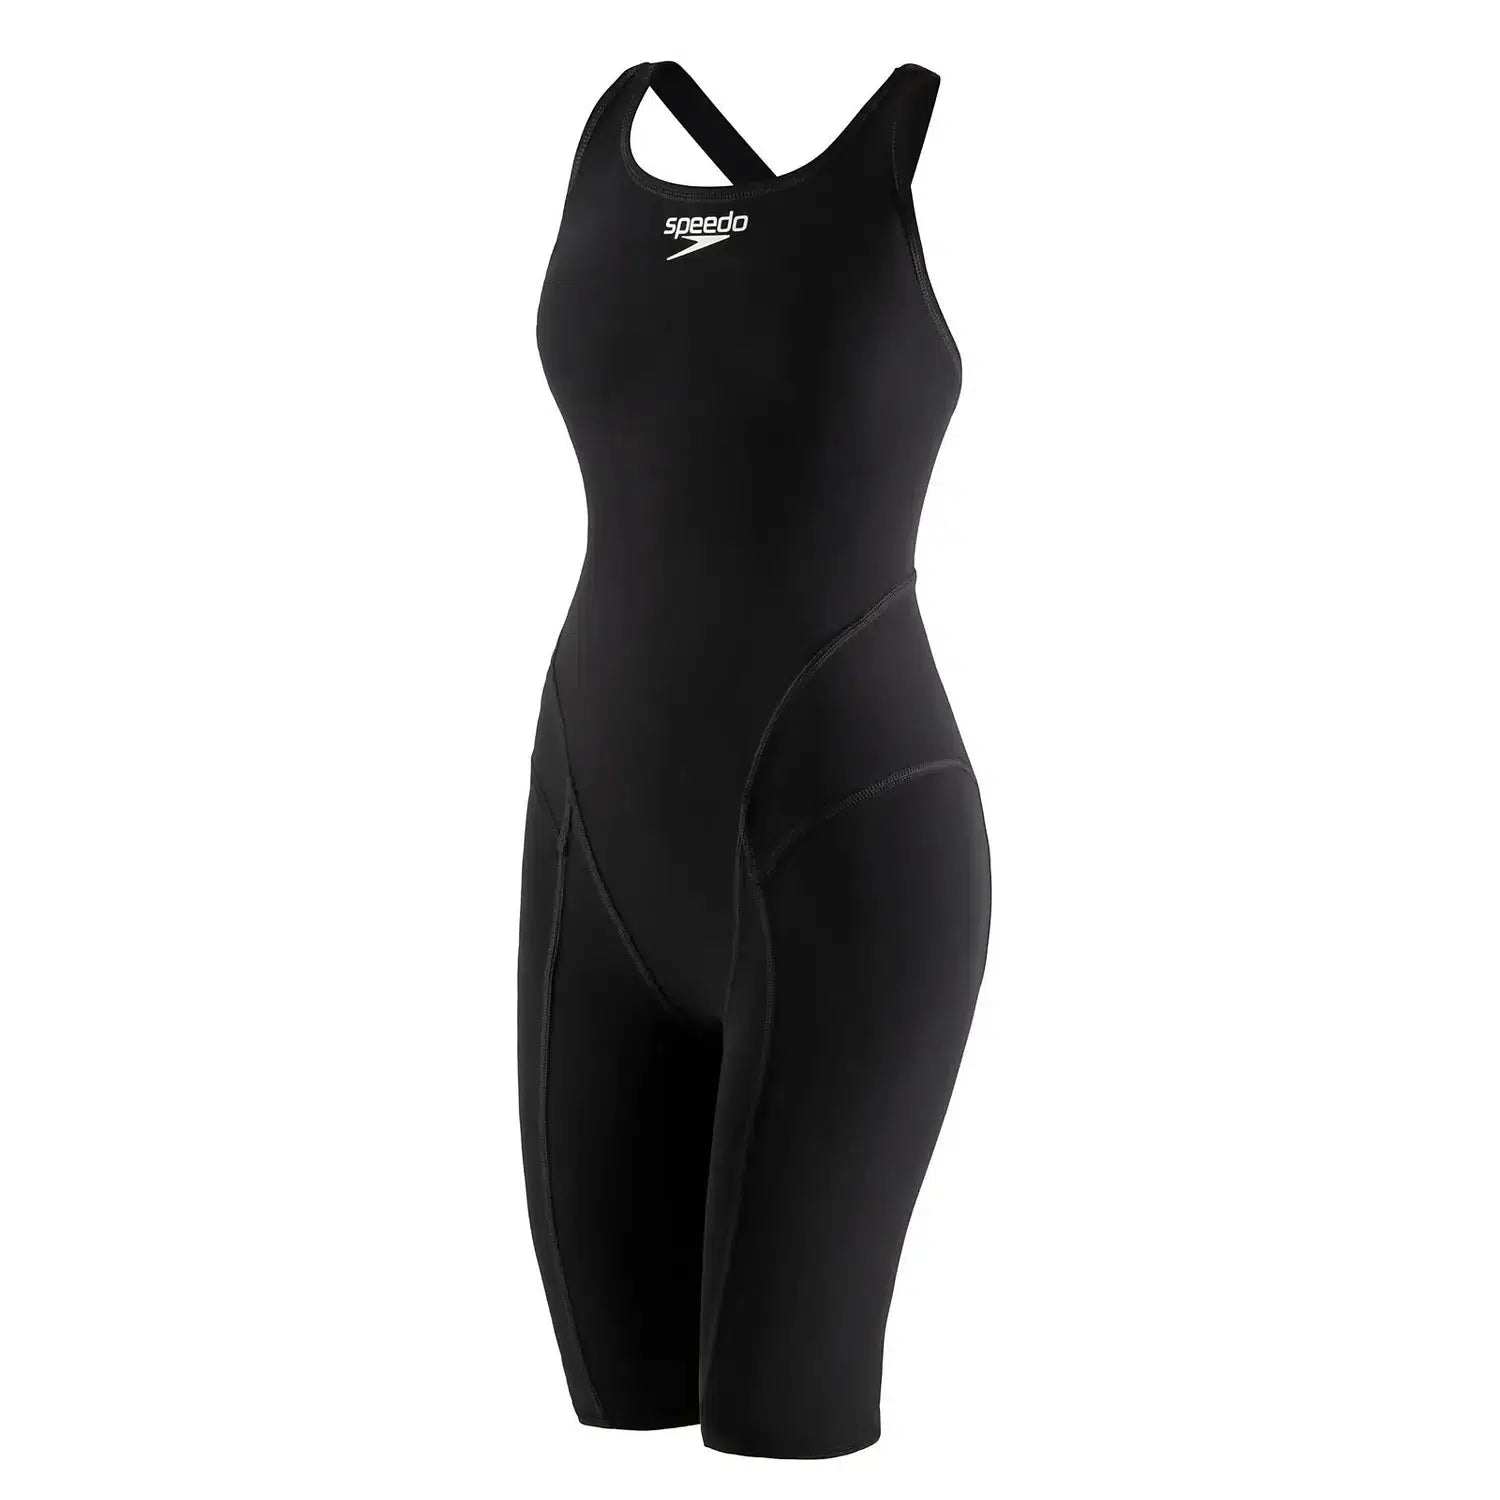 Women's Tech Suits - Free Shipping on All Swimming Tech Suits!